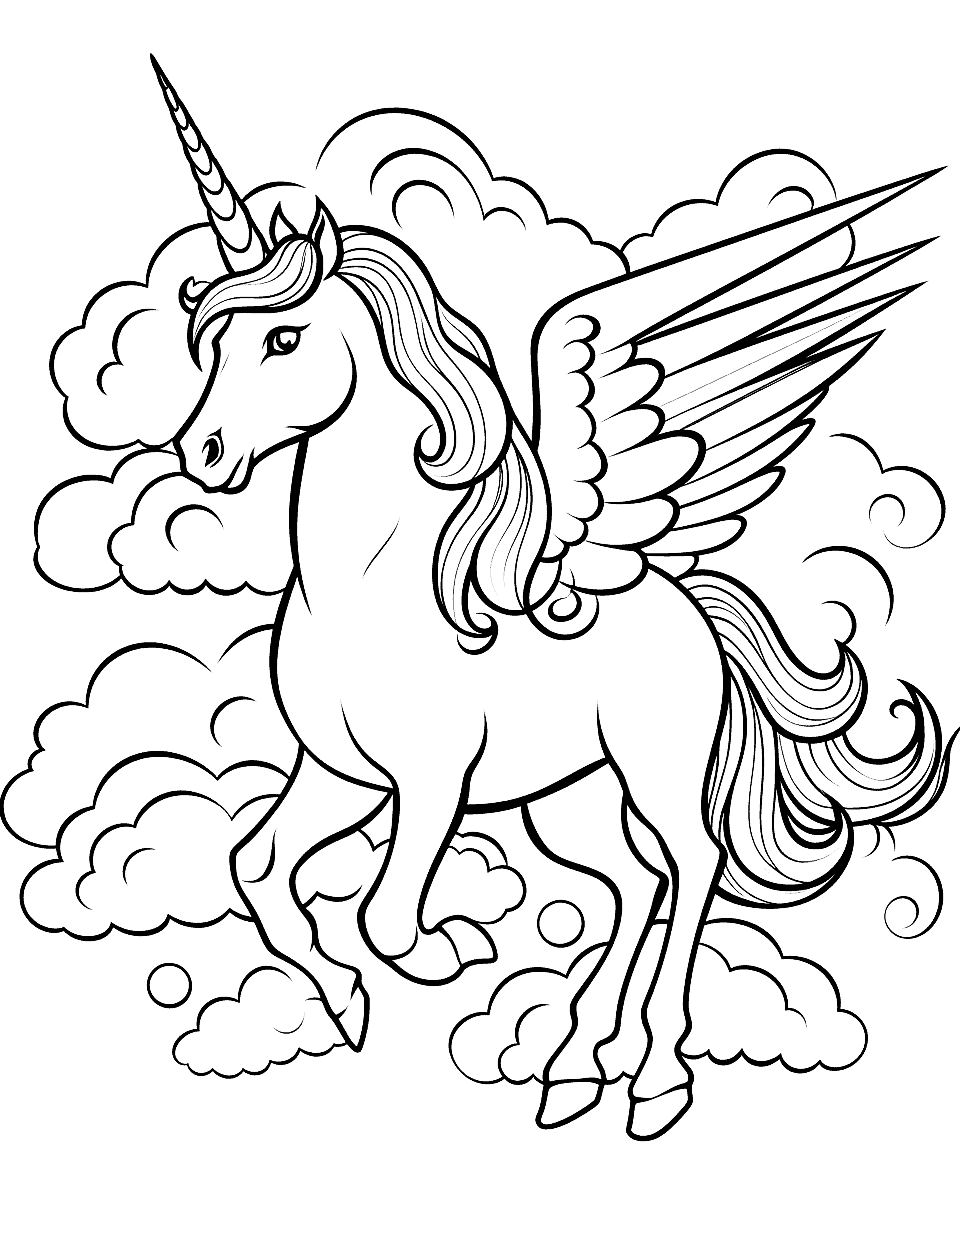 The Winged Unicorn Coloring Page - A spectacular winged unicorn (or Alicorn) soaring high in the sky among clouds.